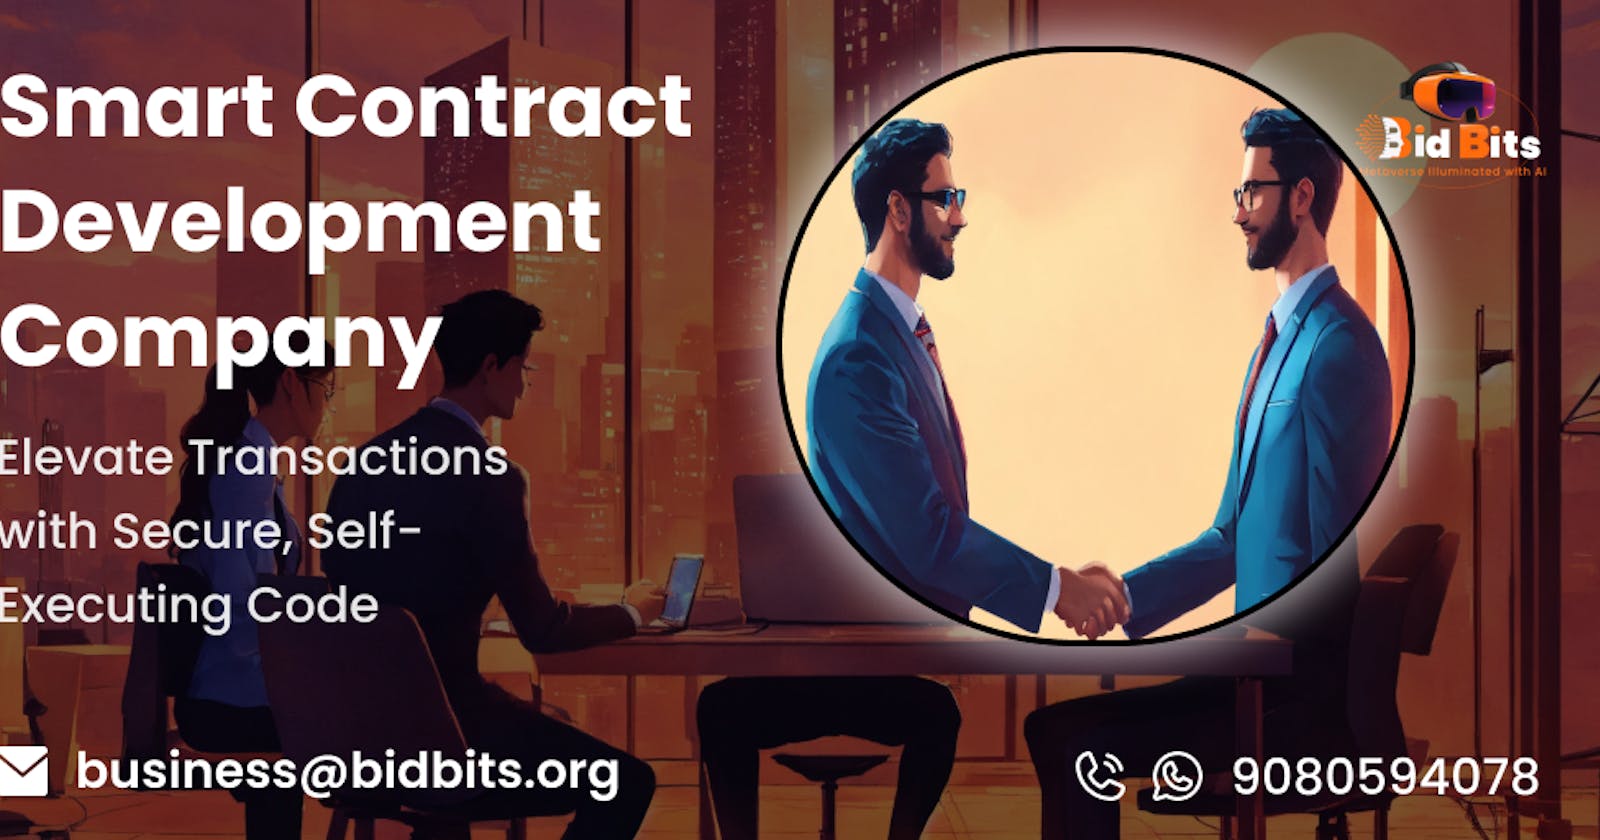 Elevate Your Business with BidBits: Your Go-To for Smart Contract Development Services